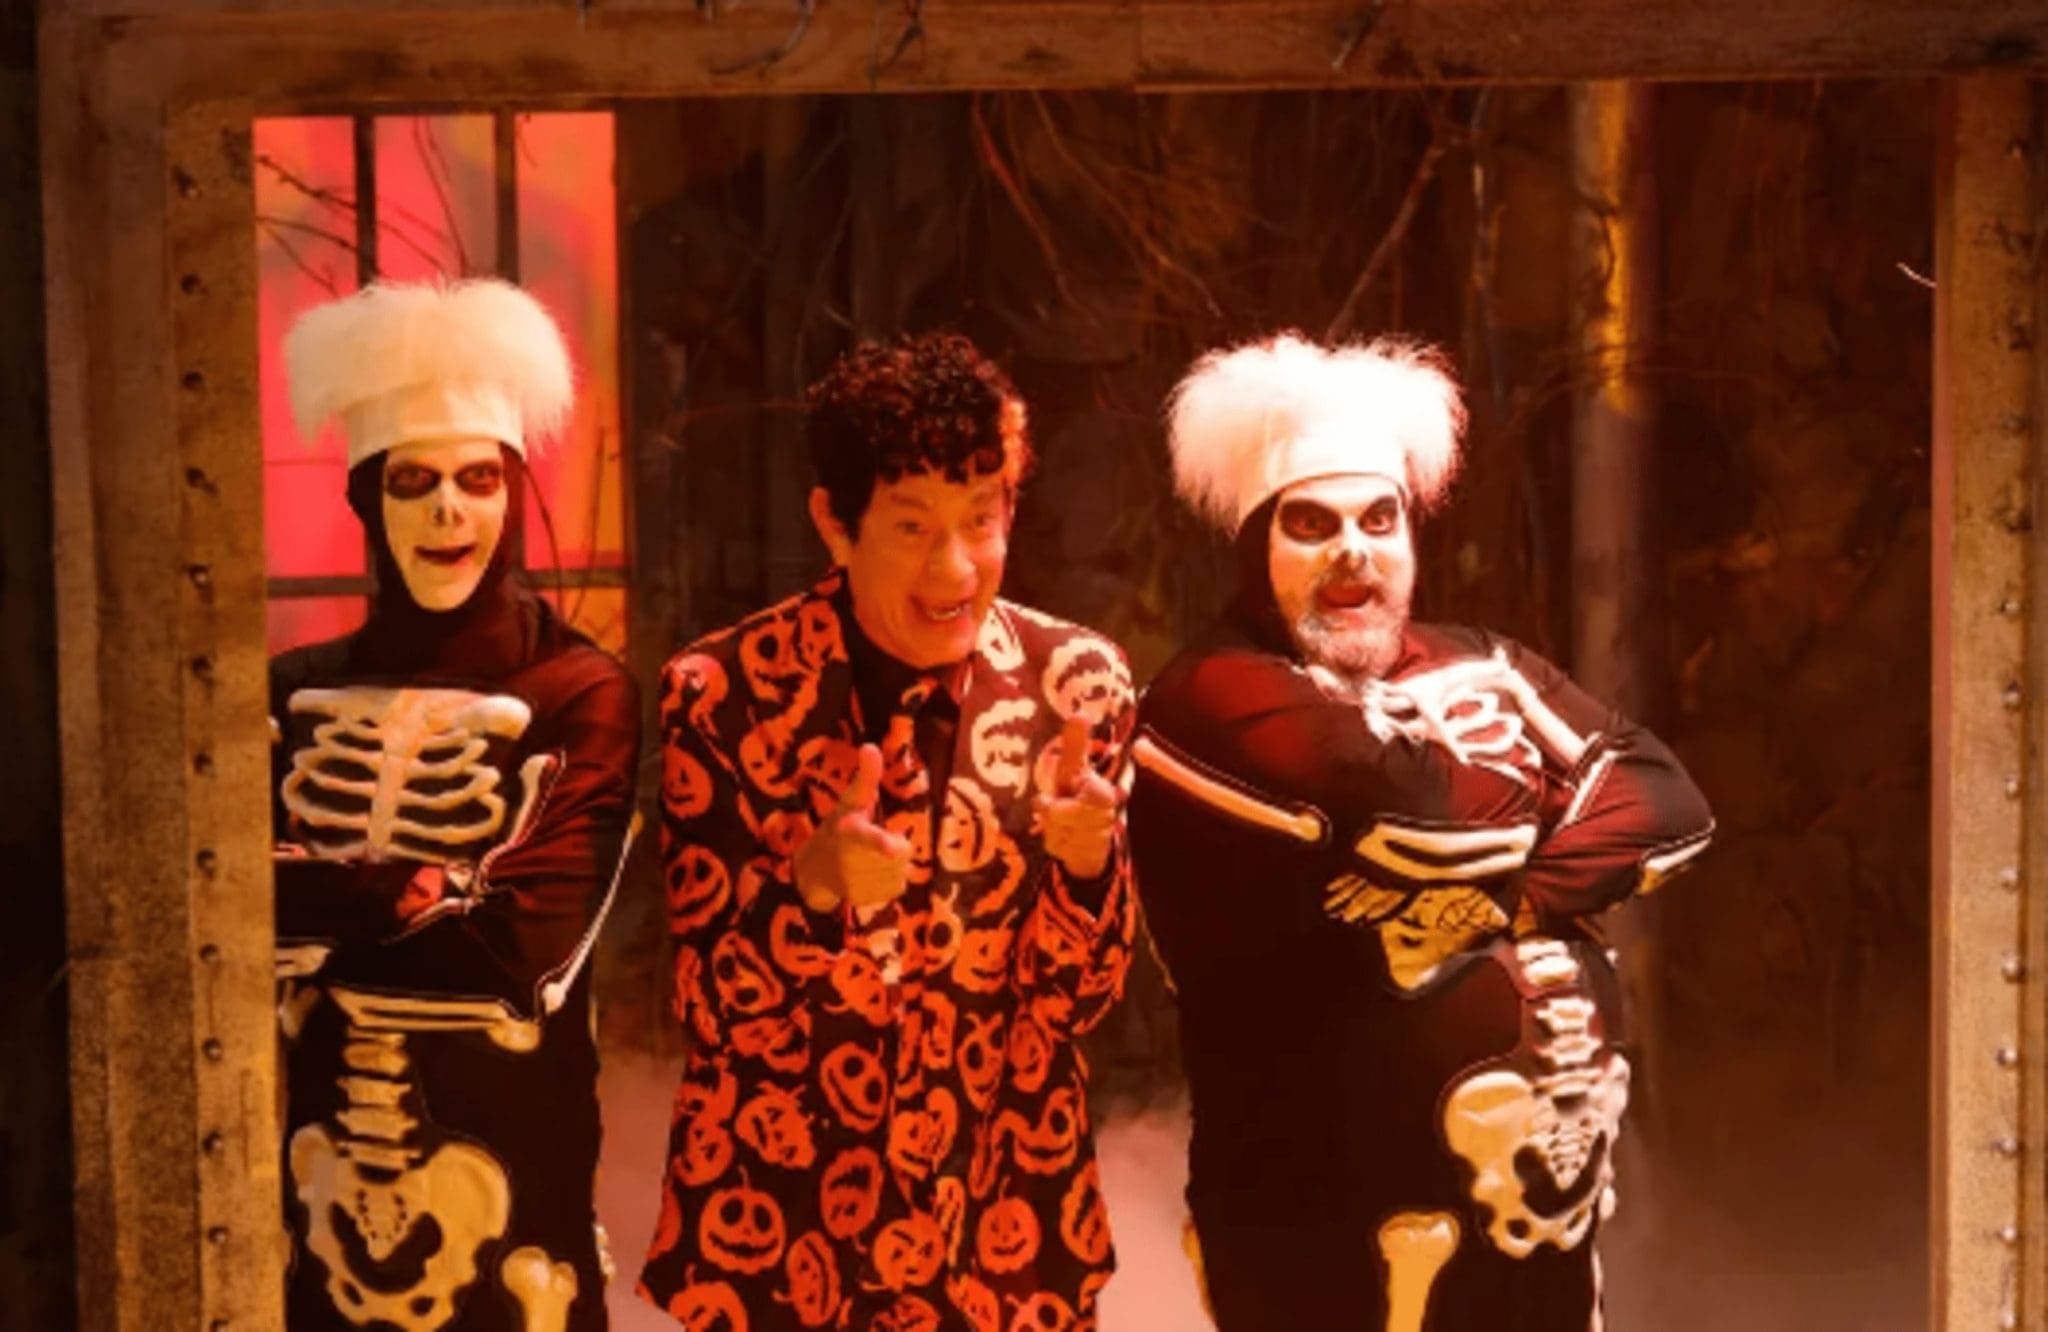 Jack Harlow's First SNL As Host Features A Return Appearance By Tom Hanks In Costume As His Famous David S. Pumpkins Character